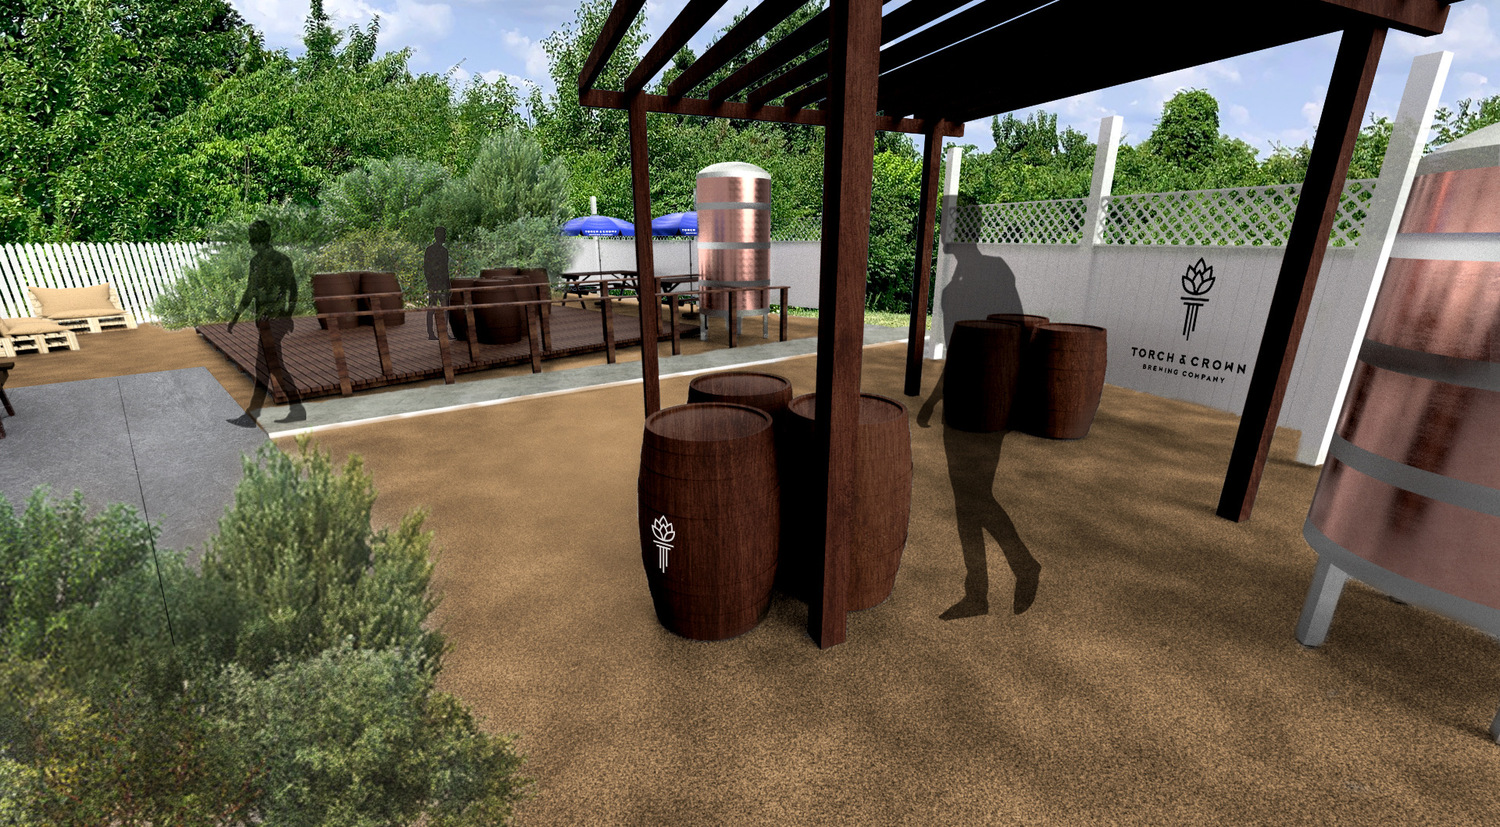 Renderings of Torch & Crown Brewing Company's new beer garden layout at Best Pizza & Dive Bar on the Napeague Stretch. COURTESY TORCH & CROWN BREWING COMPANY